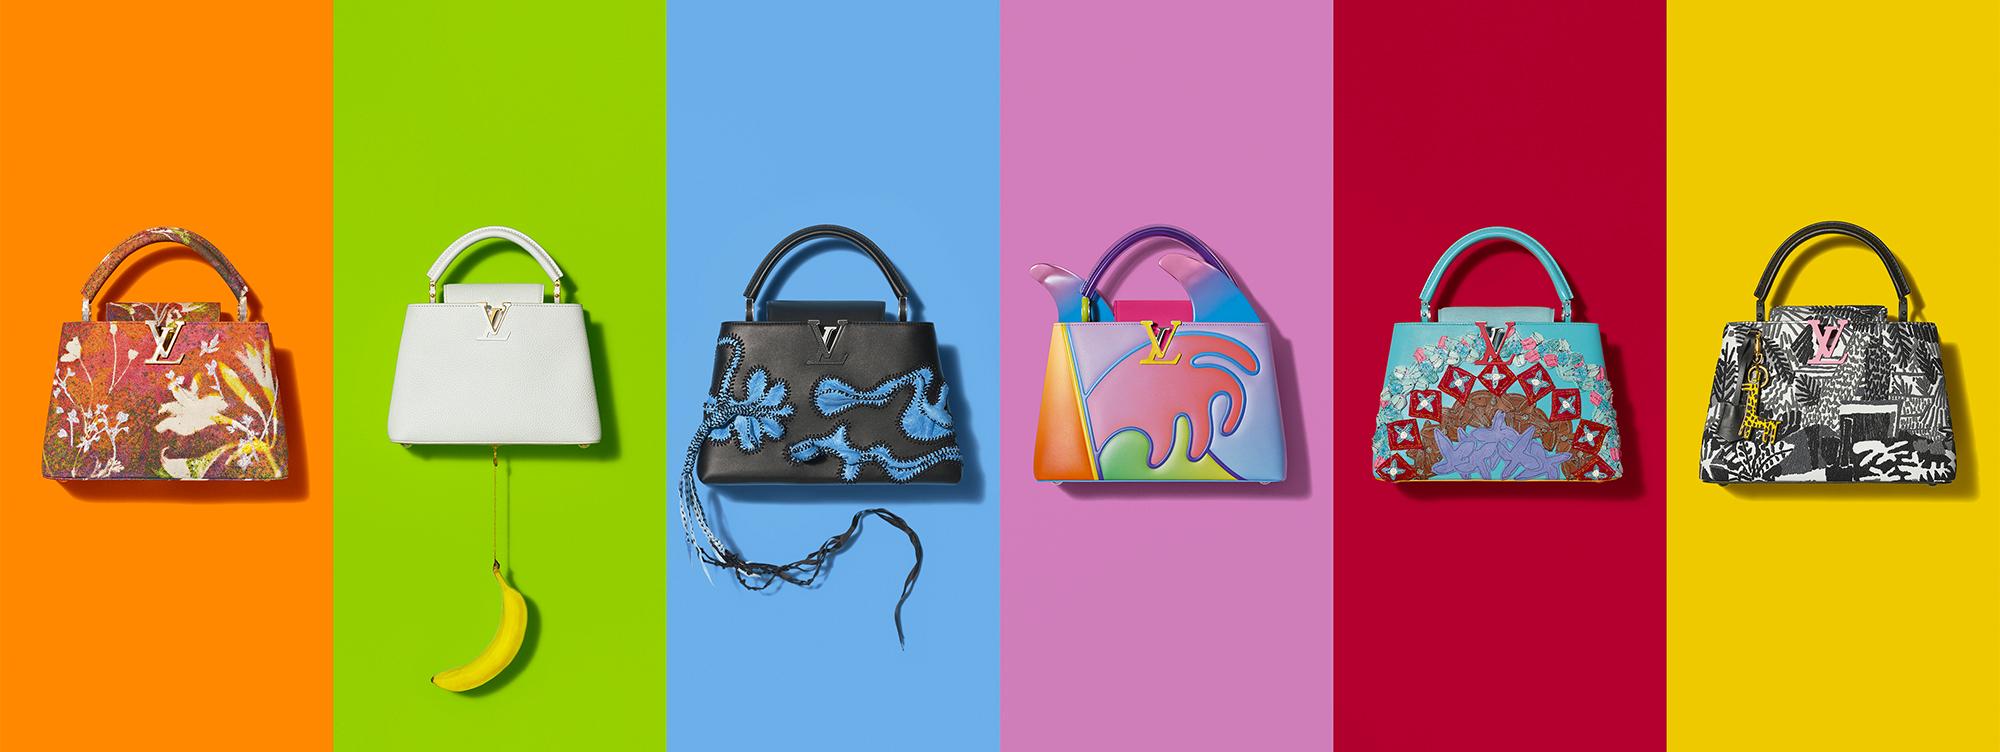 Louis Vuitton: The ArtyCapucines Collection